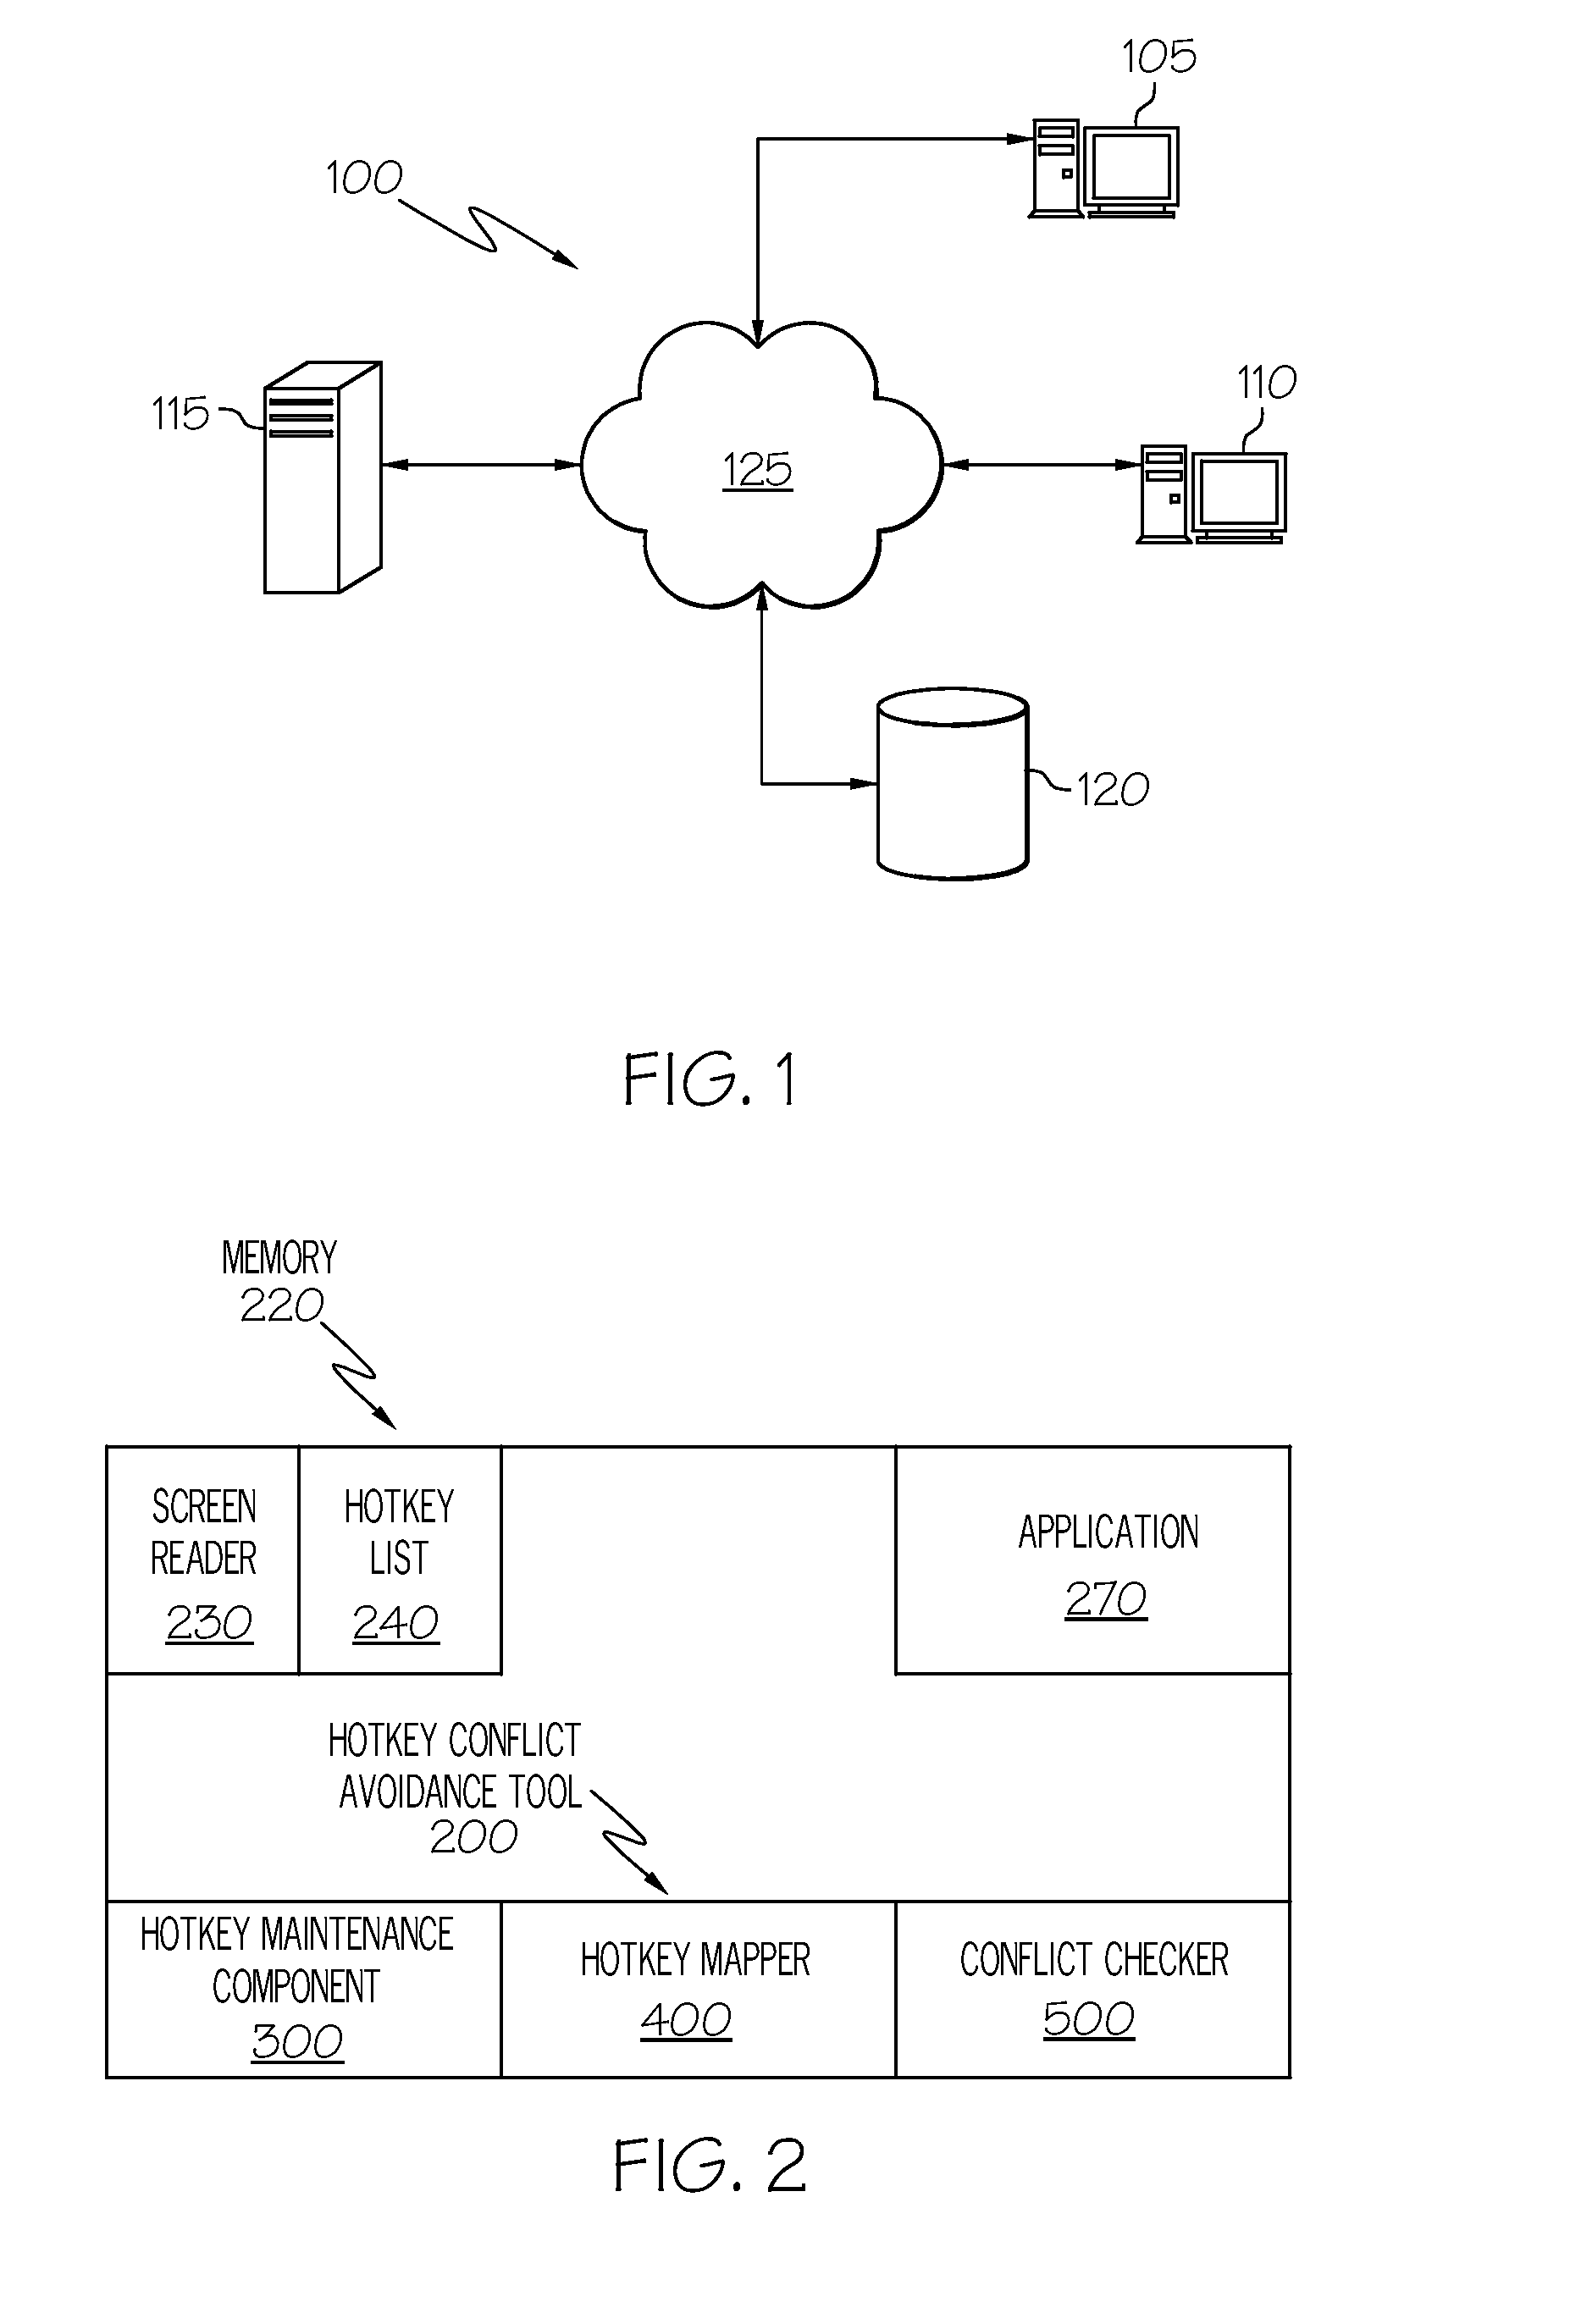 Method and apparatus for identifying hotkey conflicts